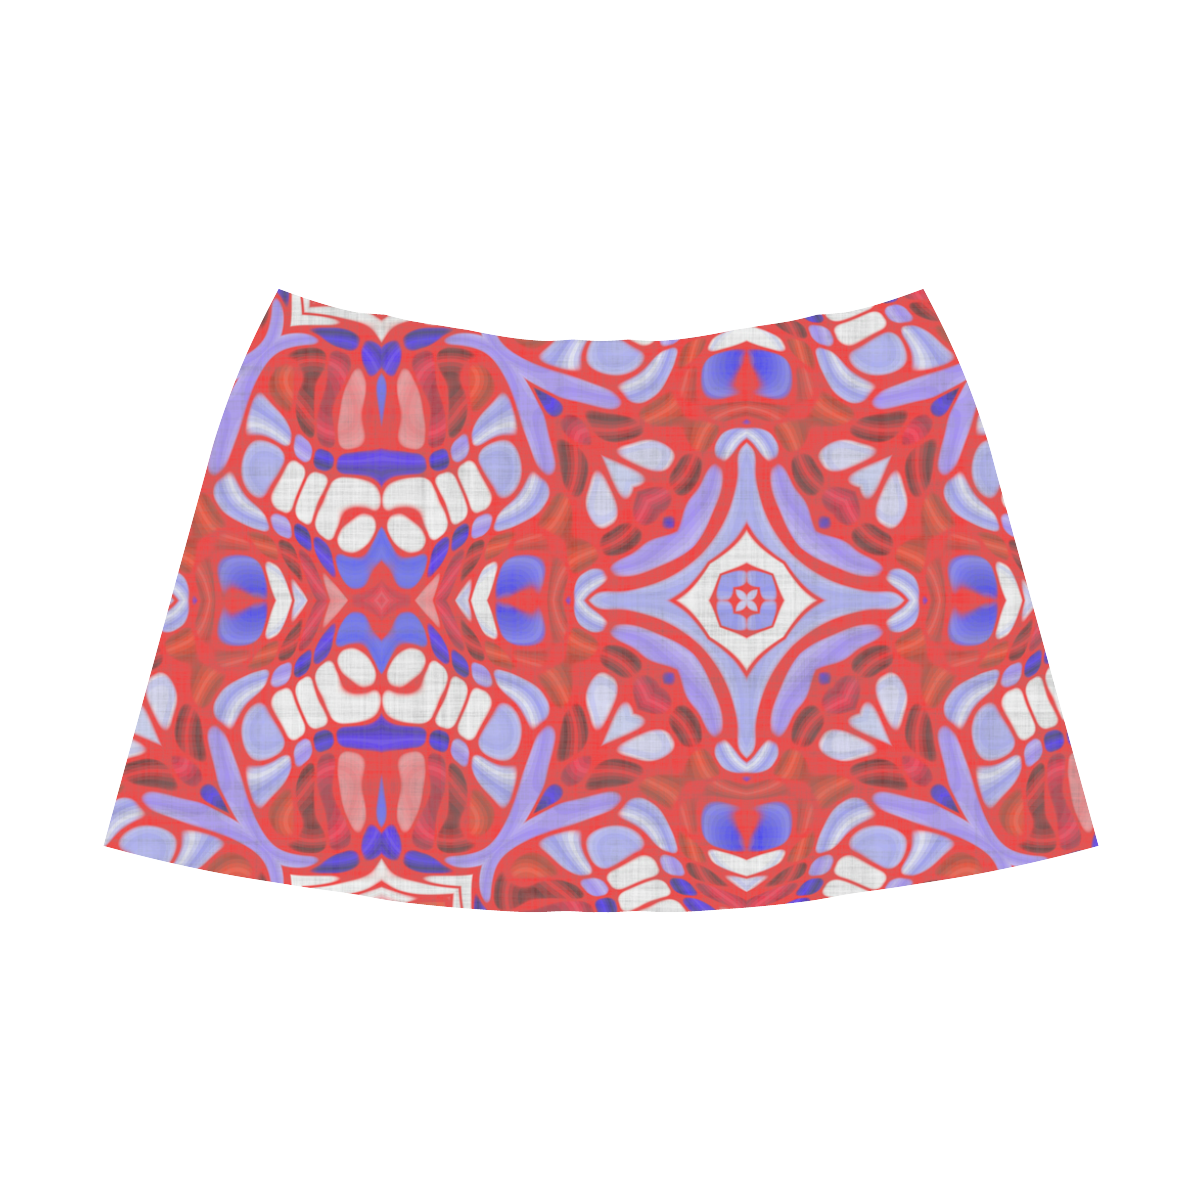 Red Whote and Blue Geometric Pattern Mnemosyne Women's Crepe Skirt (Model D16)